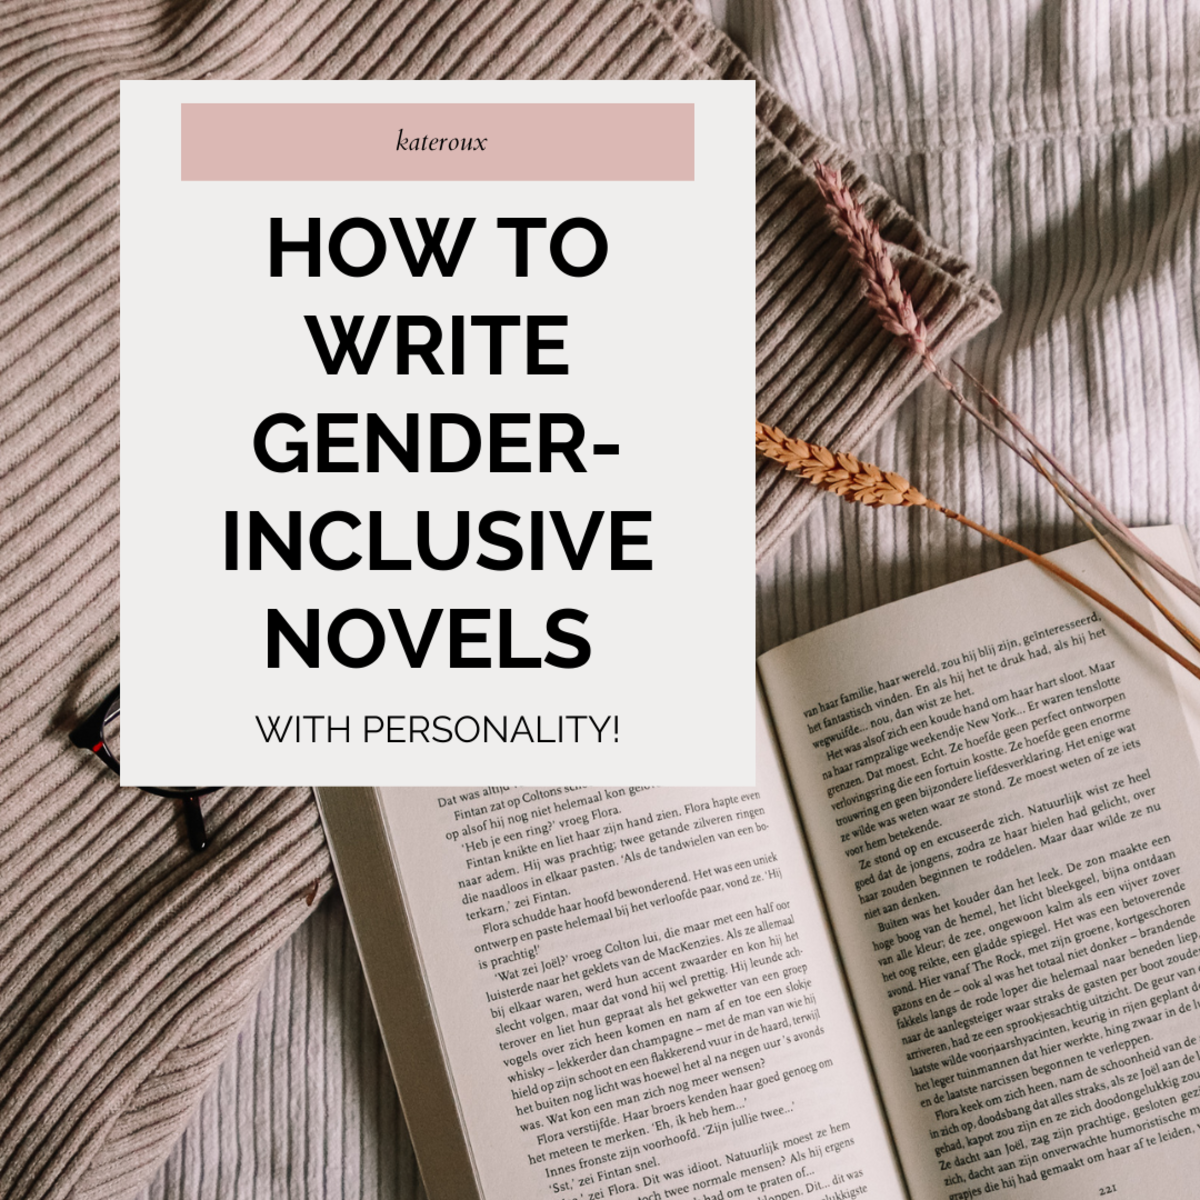 How to Write Gender-Inclusive Novels with Personality!